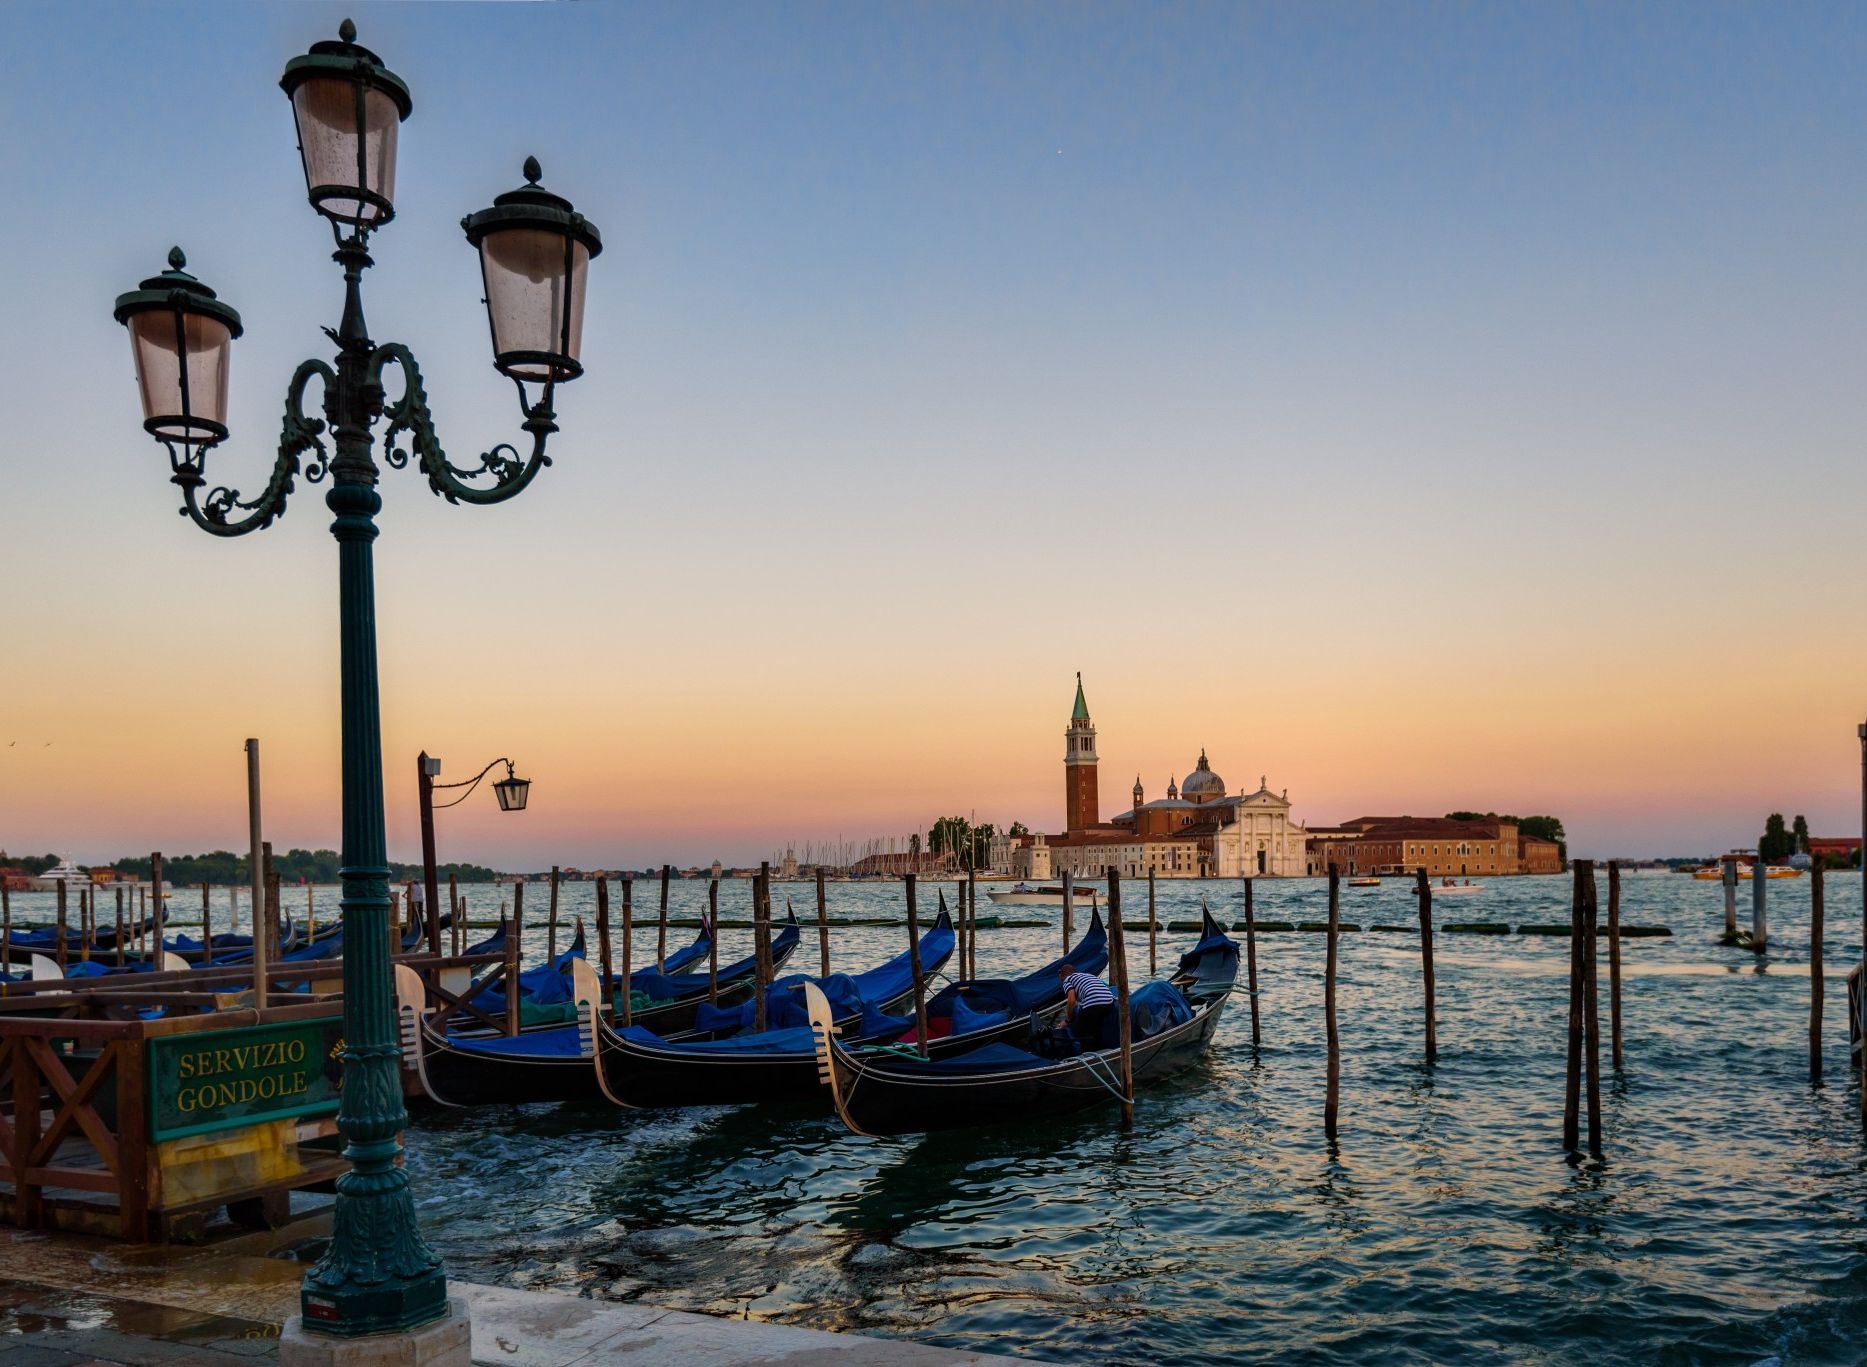 Destinations 2019: Italy’s charm in 4 wonderful localities